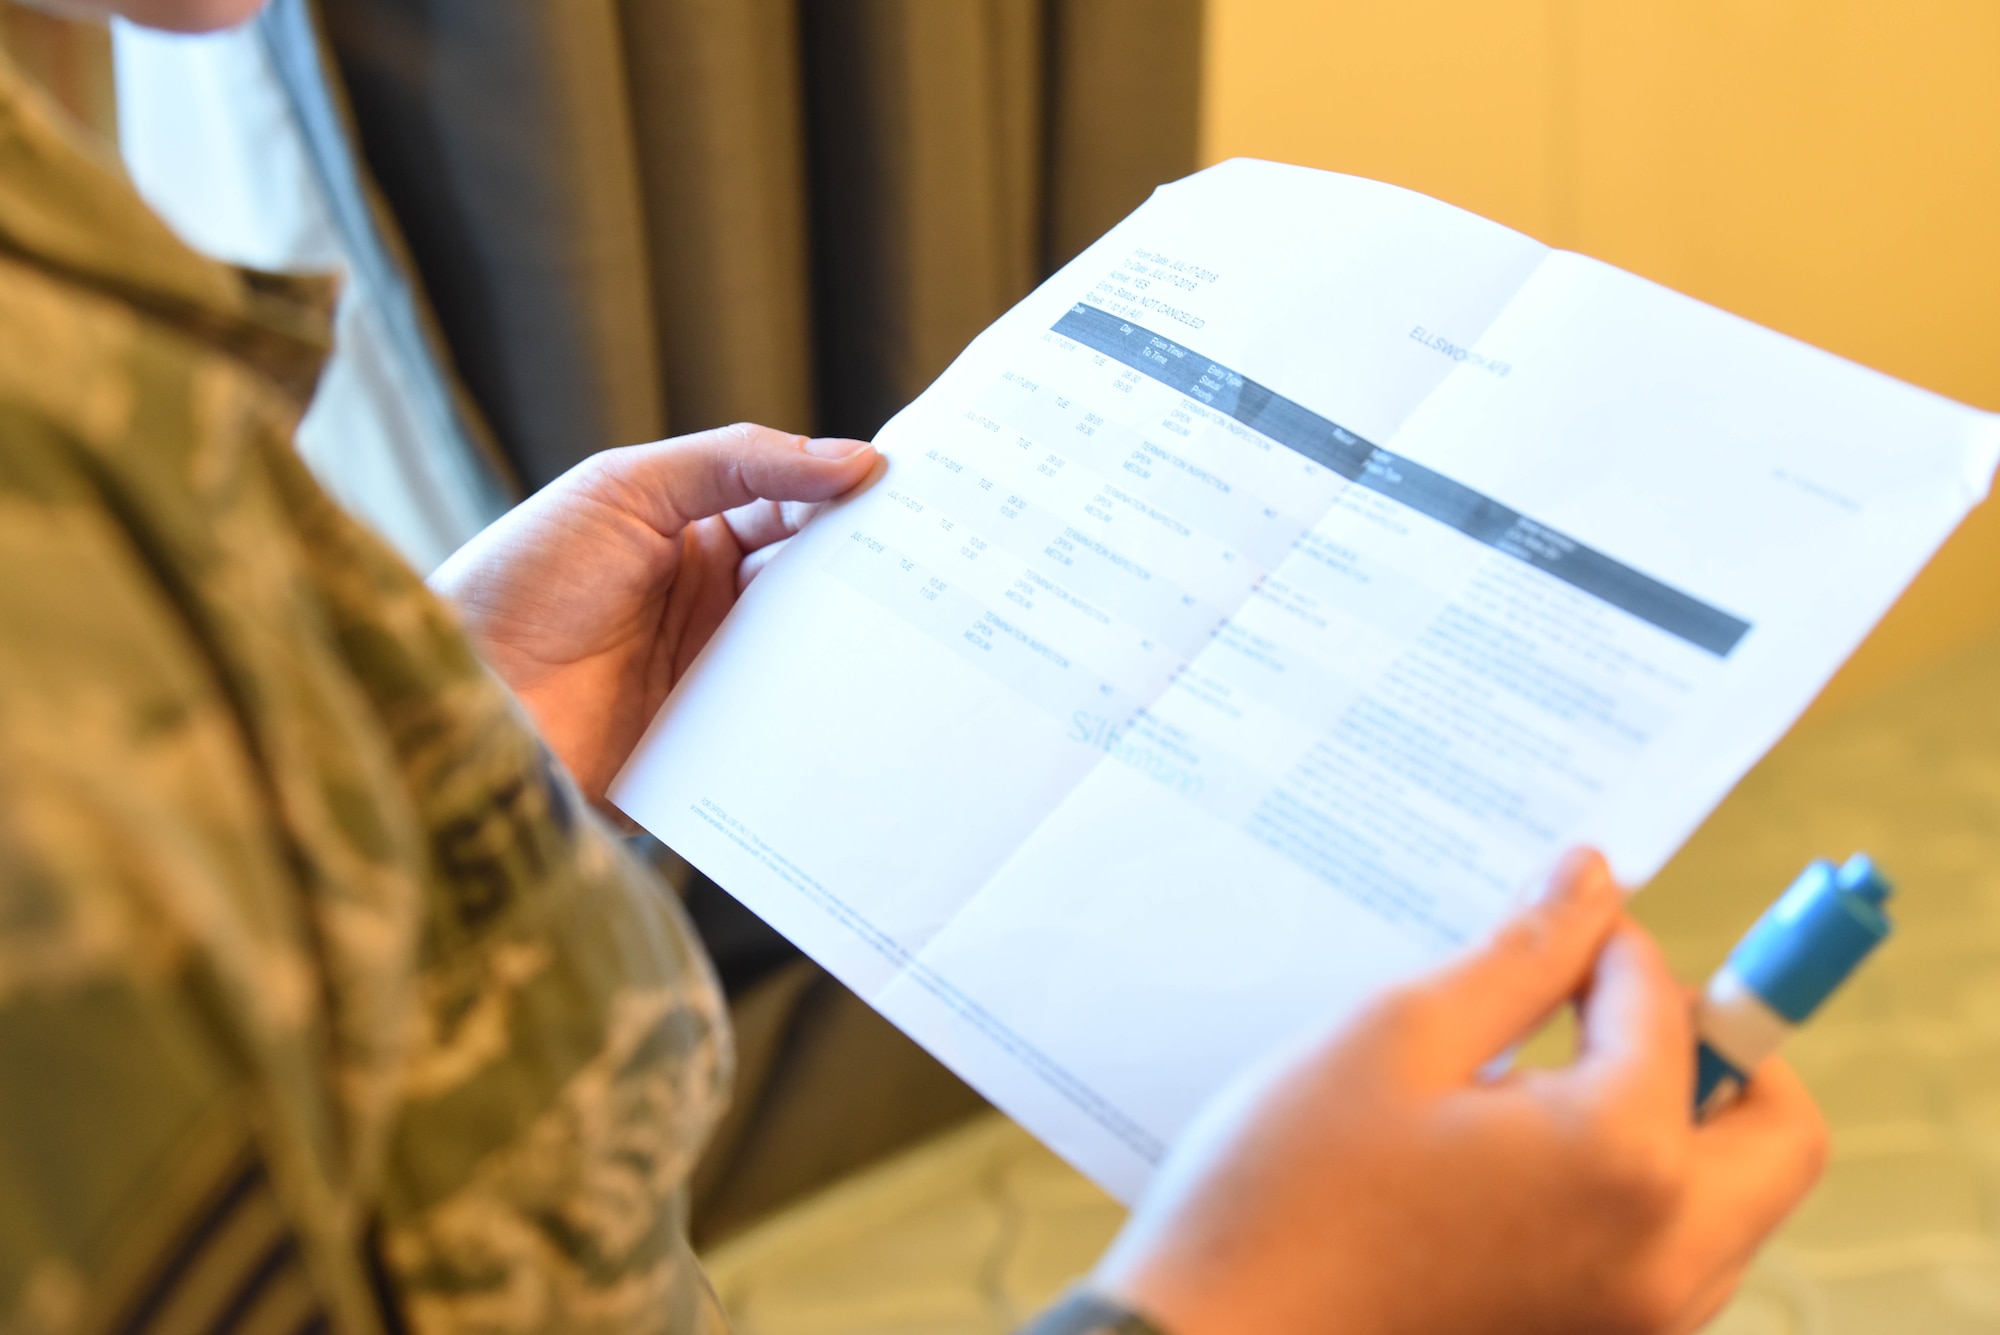 Staff Sgt. Hailey Staker, an Airman dorm leader, looks at a checklist at Ellsworth Air Force Base, S.D., July 17, 2018. Dorm leaders check if Airmen have completed all of their necessary paperwork and cleaned their dorm rooms so new residents can move in. (U.S. Air Force photo by Airman 1st Class Thomas Karol)